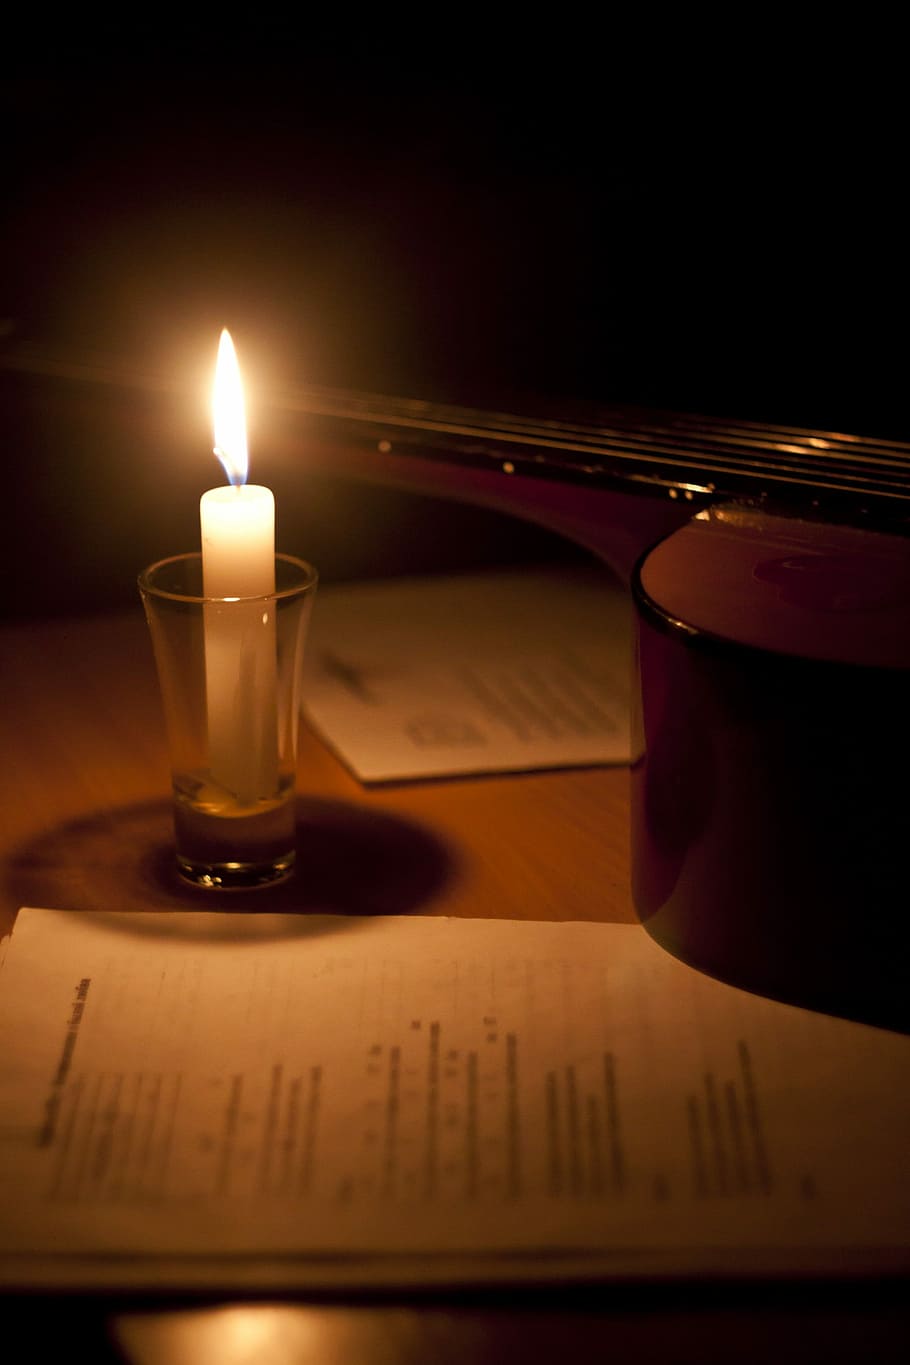 Candle, Guitar, Poetry, Inspiration, table, night, flame, indoors, heat - temperature, illuminated